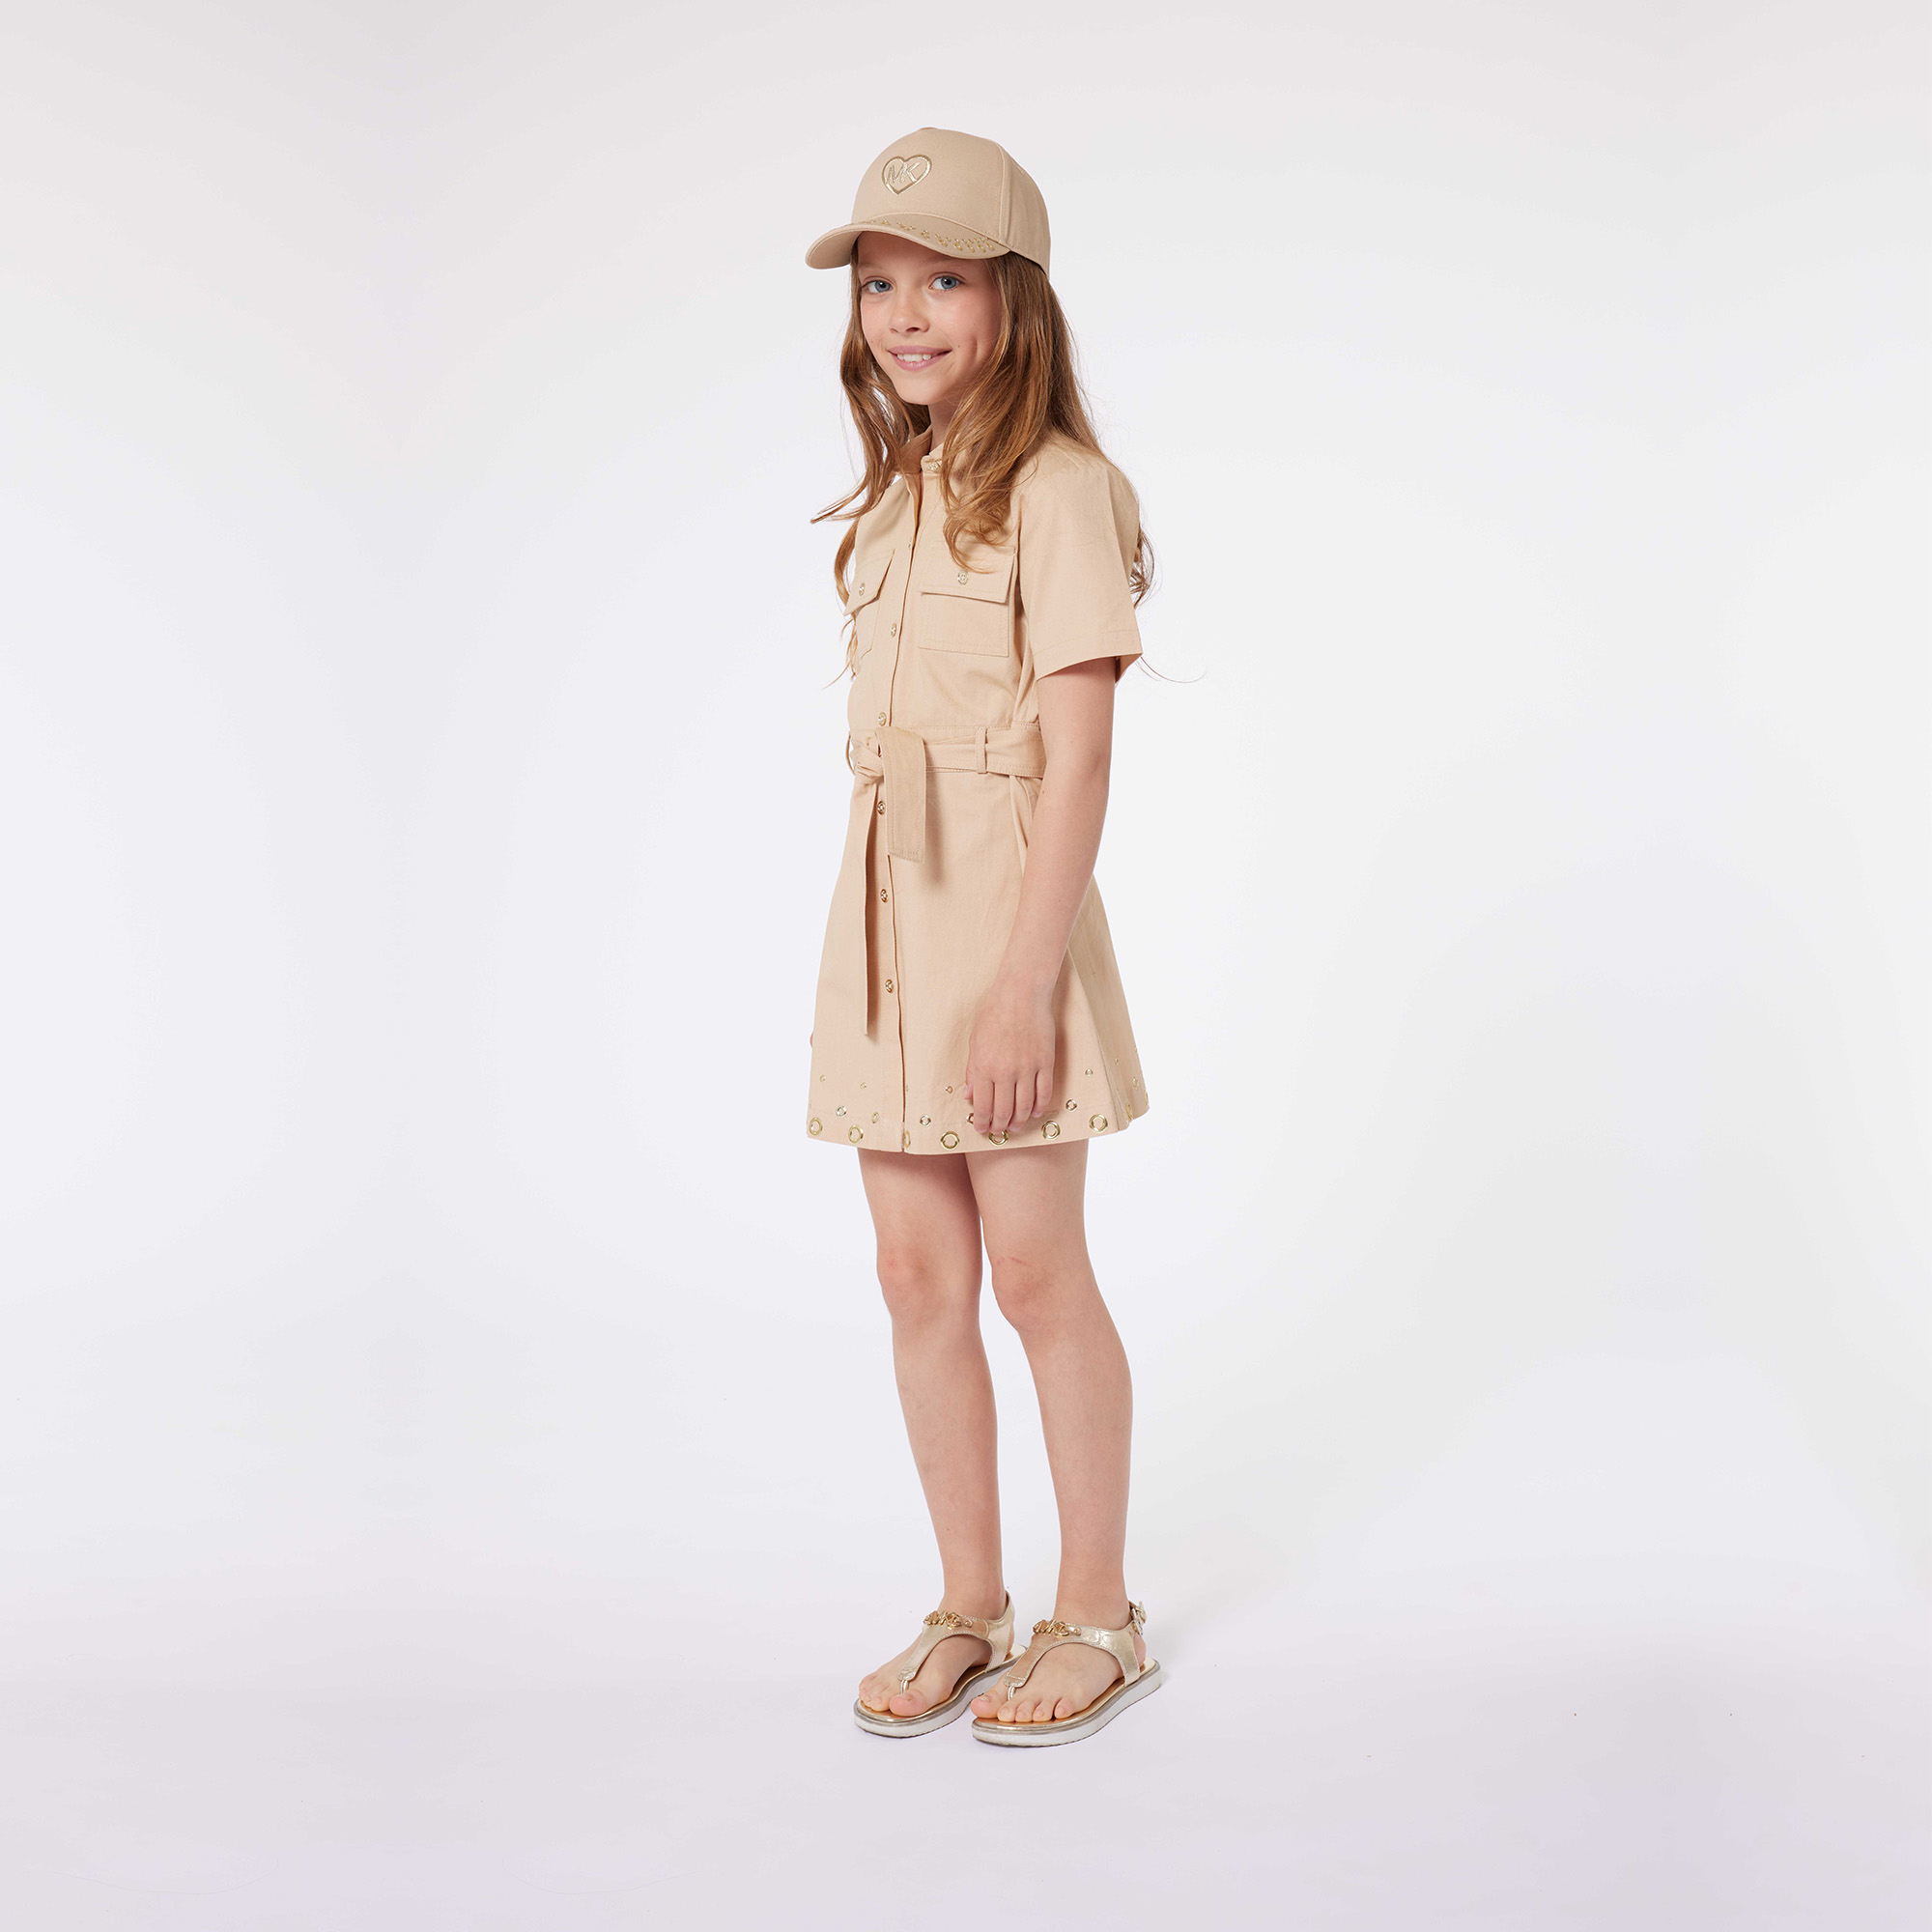 Embroidered cotton cap MICHAEL KORS for GIRL